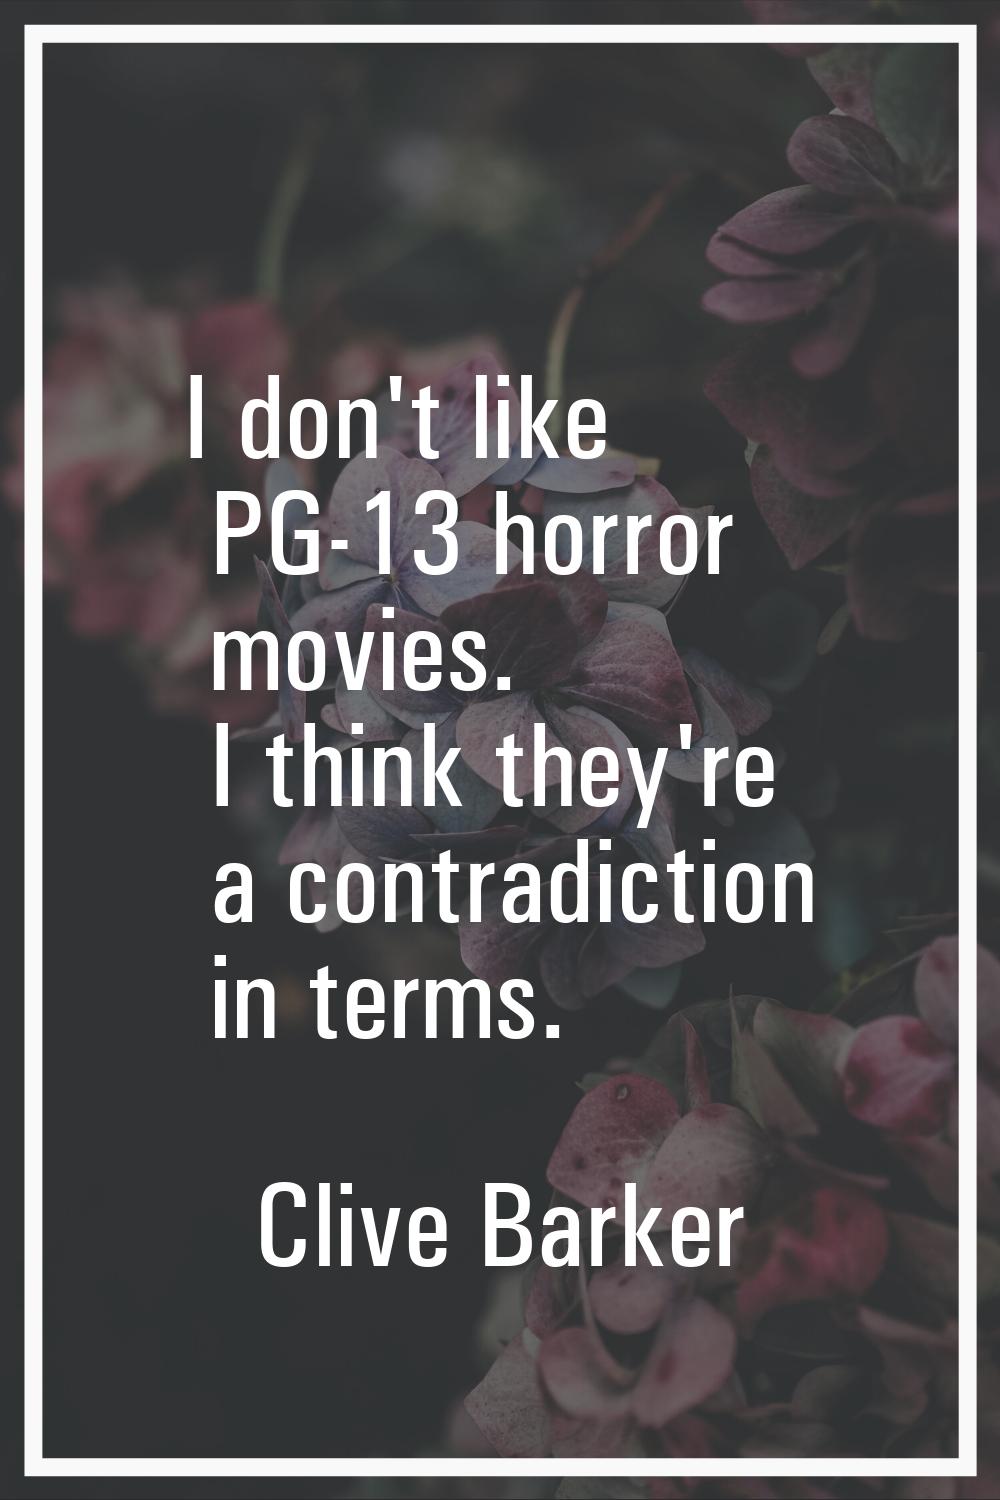 I don't like PG-13 horror movies. I think they're a contradiction in terms.